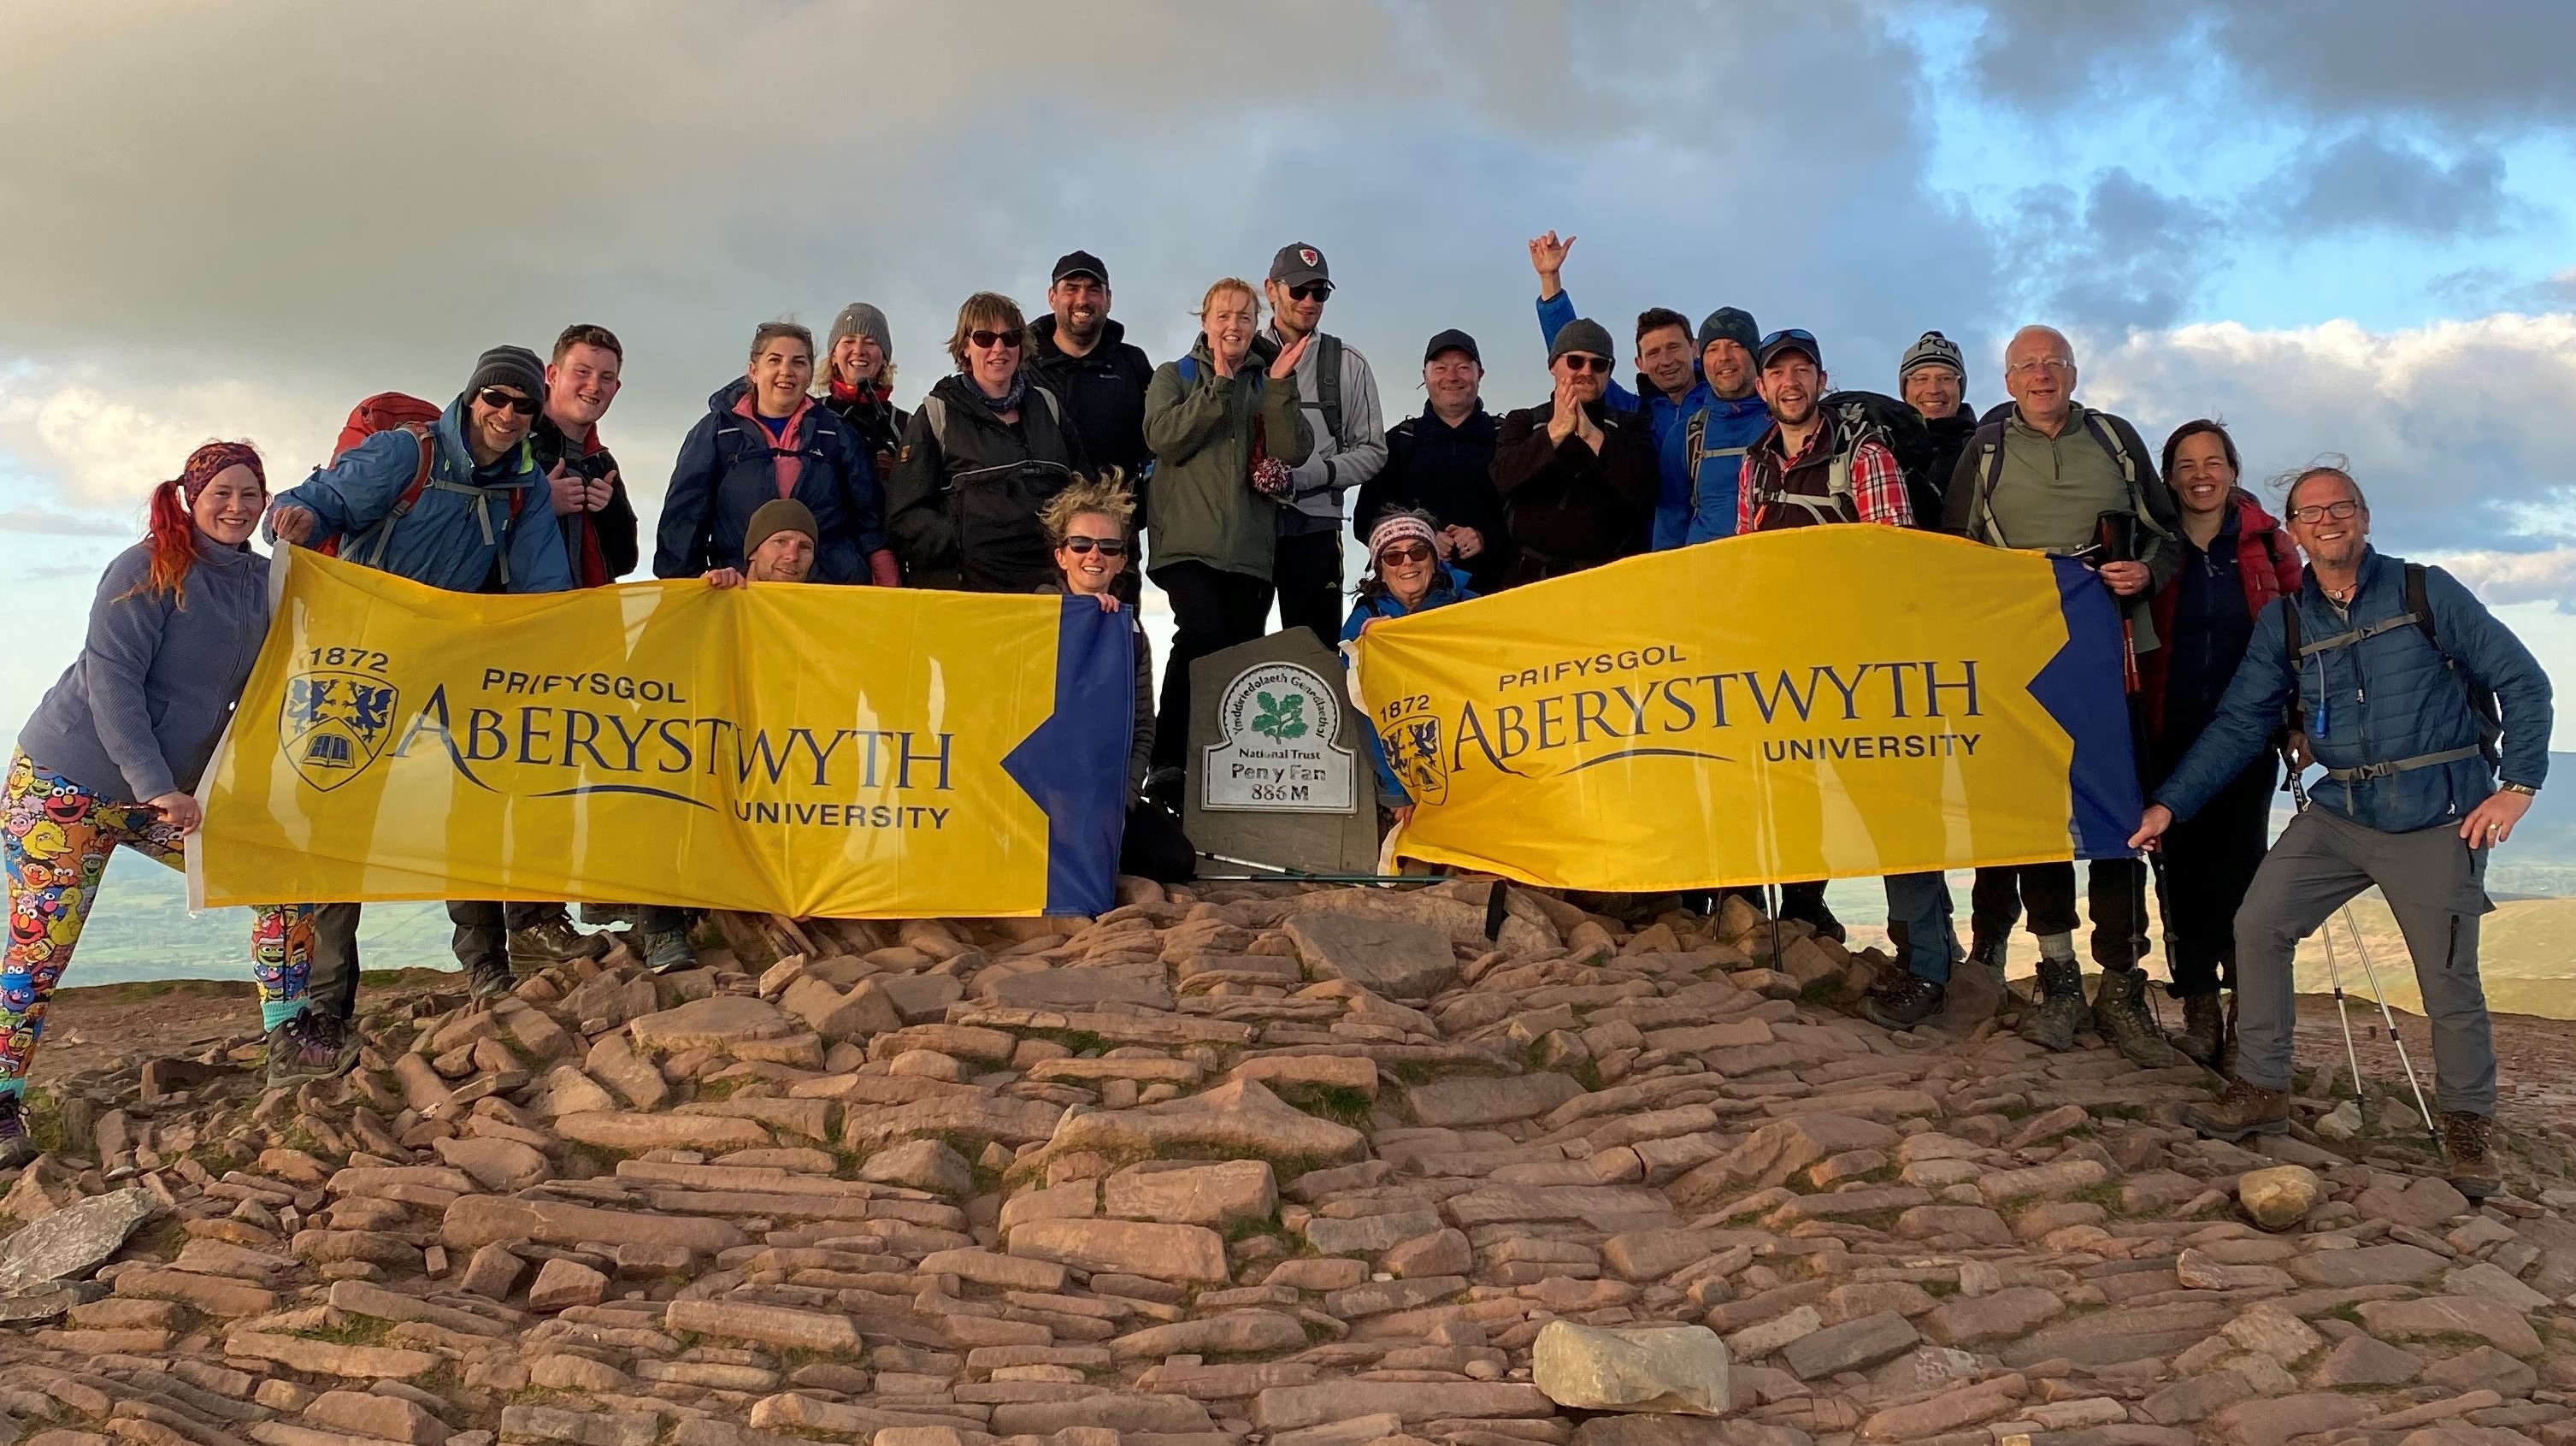 Celebrating on the summit of Pen y Fan: Staff from Aberystwyth University completed the Welsh Three Peaks Challenge in just 16 hours.